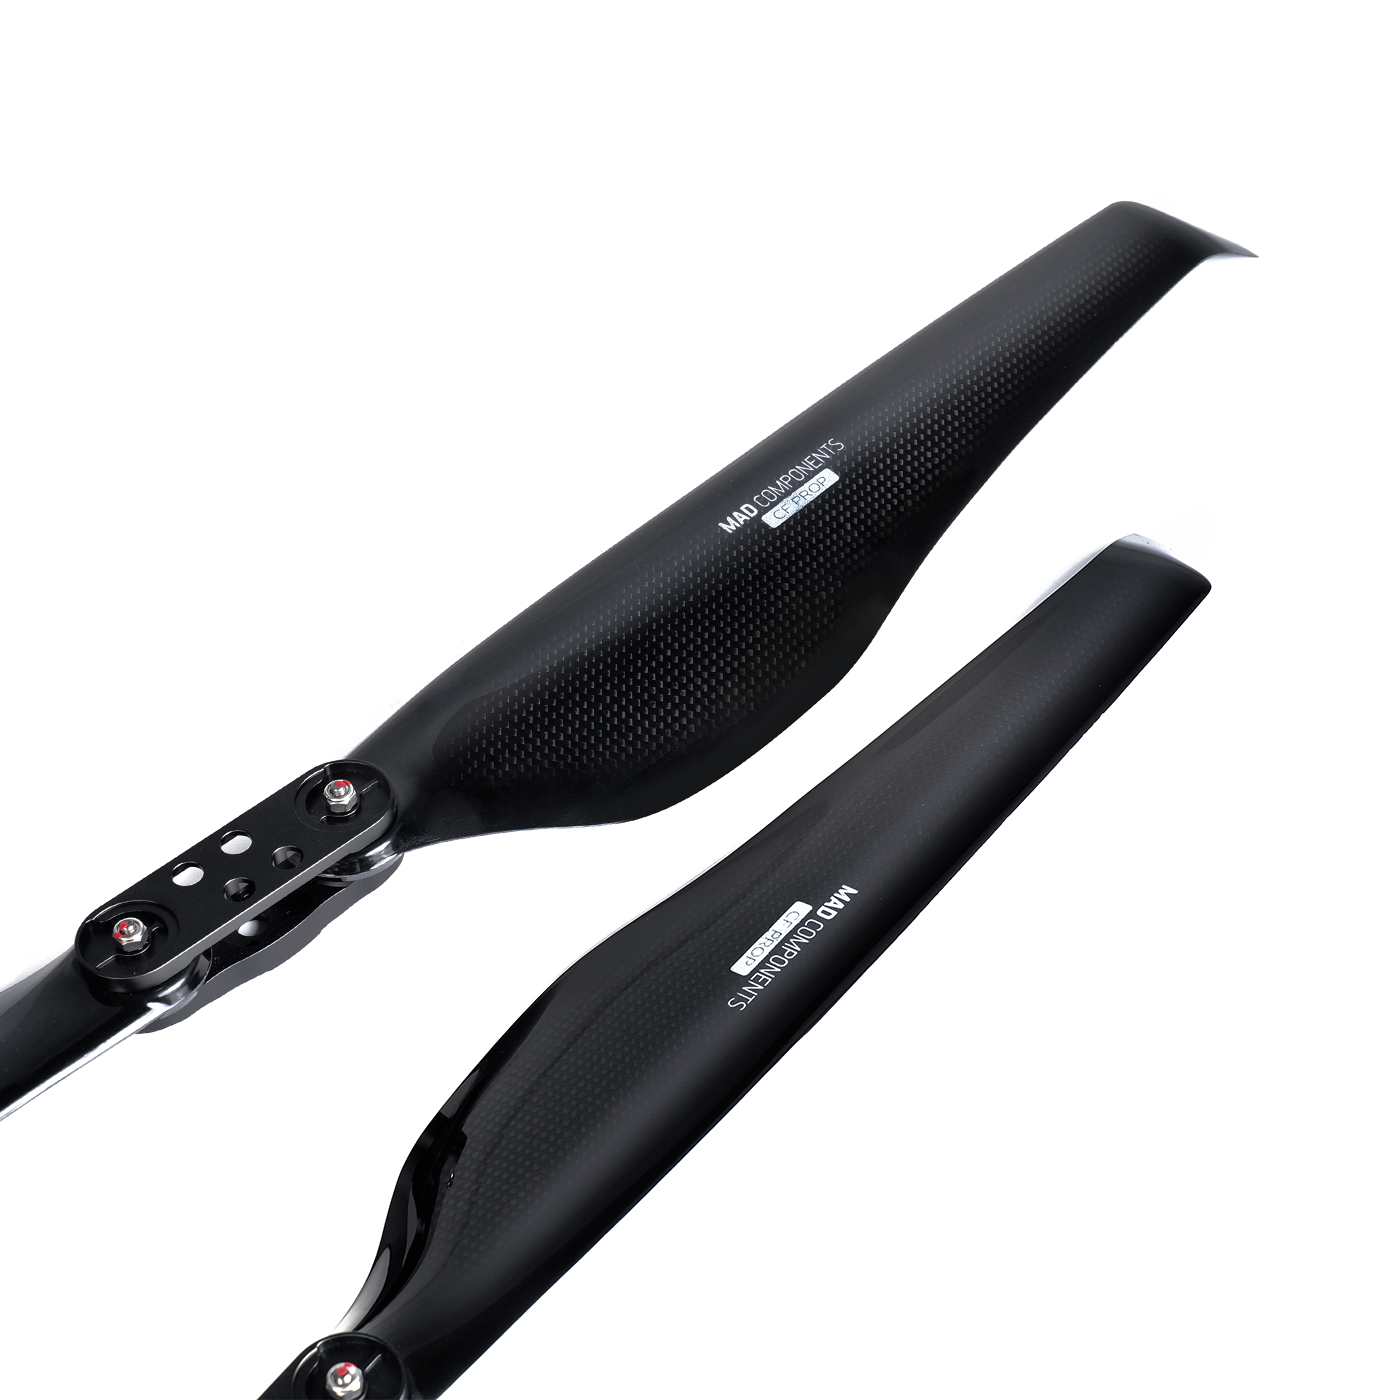 22.2X7.2in FLUXER Pro Glossy Carbon fiber folding propeller for profesional multirotor drone 1pair(CW+CCW)